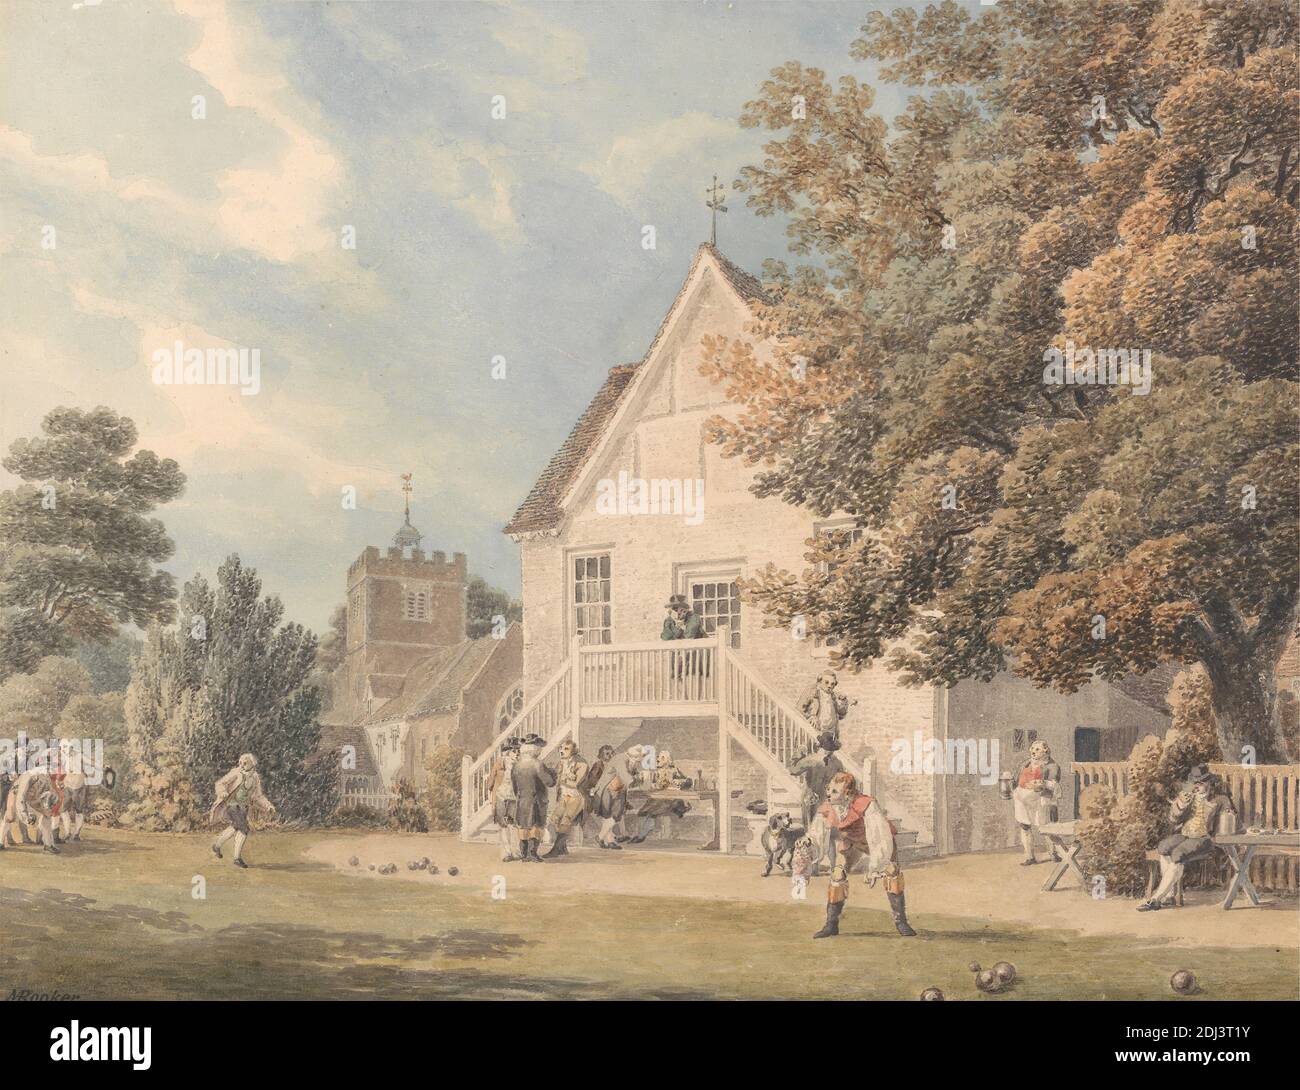 A Game of Bowls on the Bowling Green Outside the Bunch of Grapes Inn, Hurst, Berkshire, Michael 'Angelo' Rooker, 1746–1801, British, undated, Watercolor and graphite on moderately thick, slightly textured, cream, wove paper, Sheet: 8 1/4 x 10 7/8 inches (21 x 27.6 cm), architectural subject, ball games, benches, bowls, castle, dog (animal), fence, genre subject, hats, inn, leisure, men, trees, Berkshire, England, Hurst, St. Nicholas Hurst, United Kingdom Stock Photo